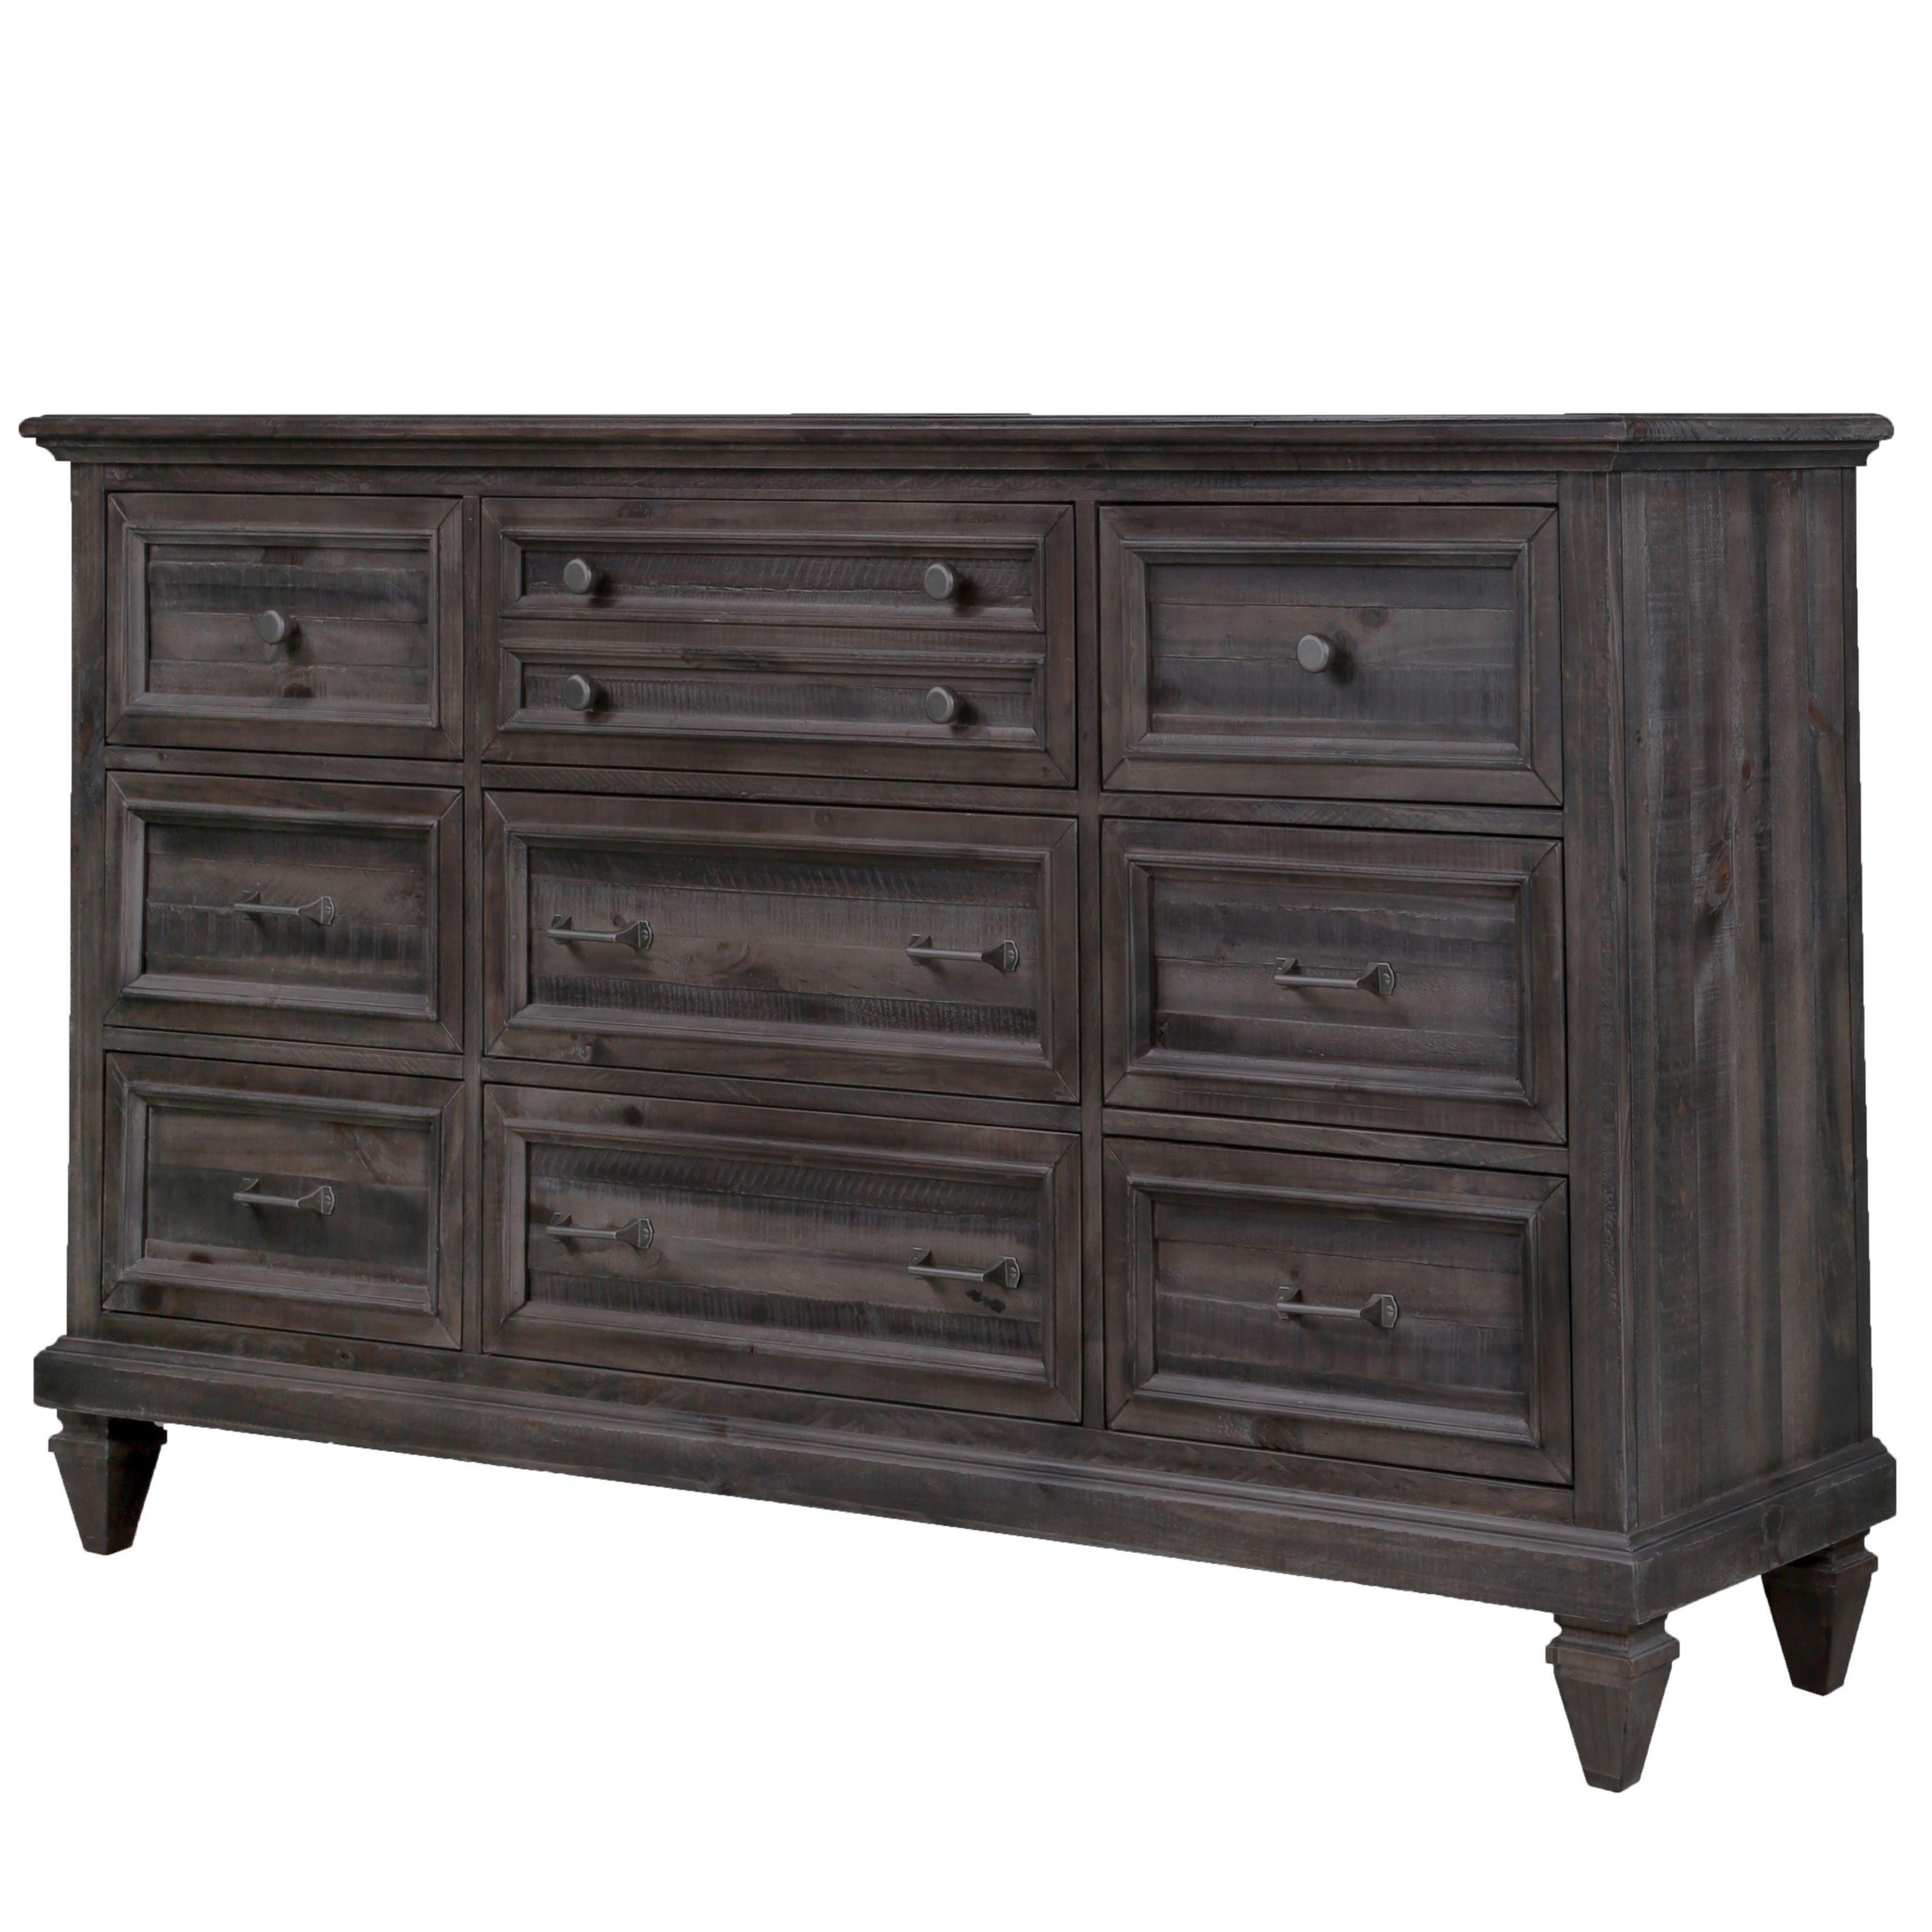 Calistoga - 9 Drawer Dresser In Weathered Charcoal - Weathered Charcoal